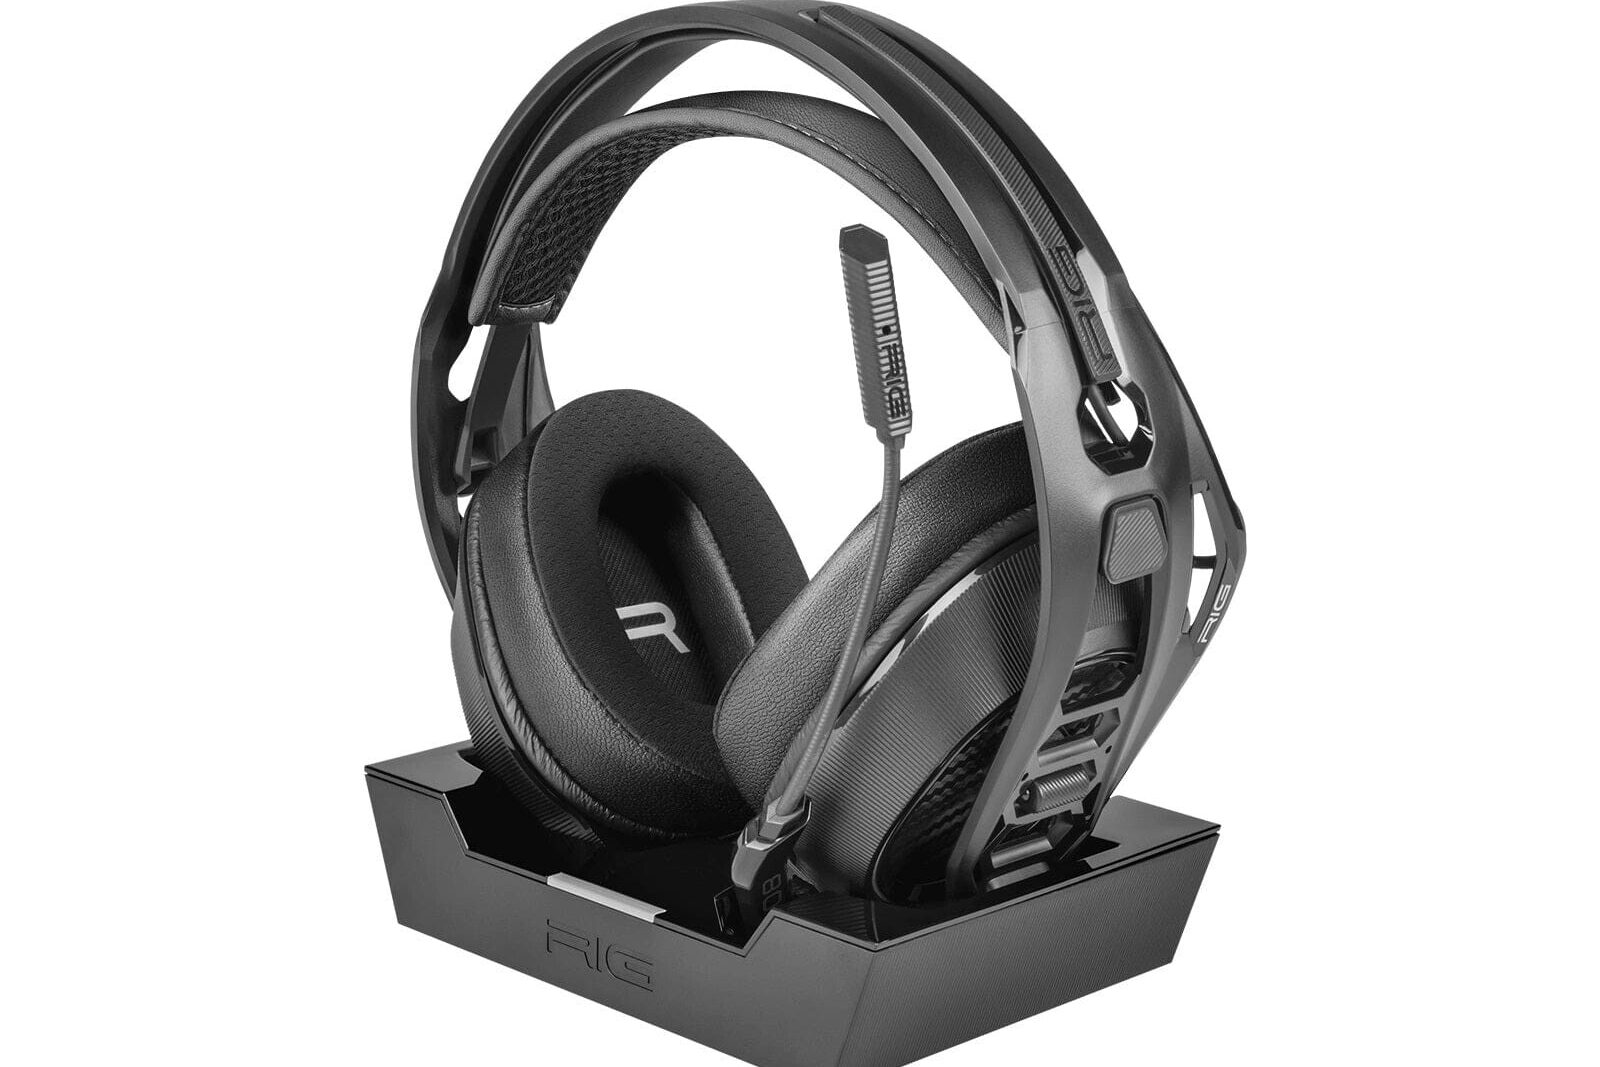 Nacon RIG 800 PRO HS Wireless Gaming Headset